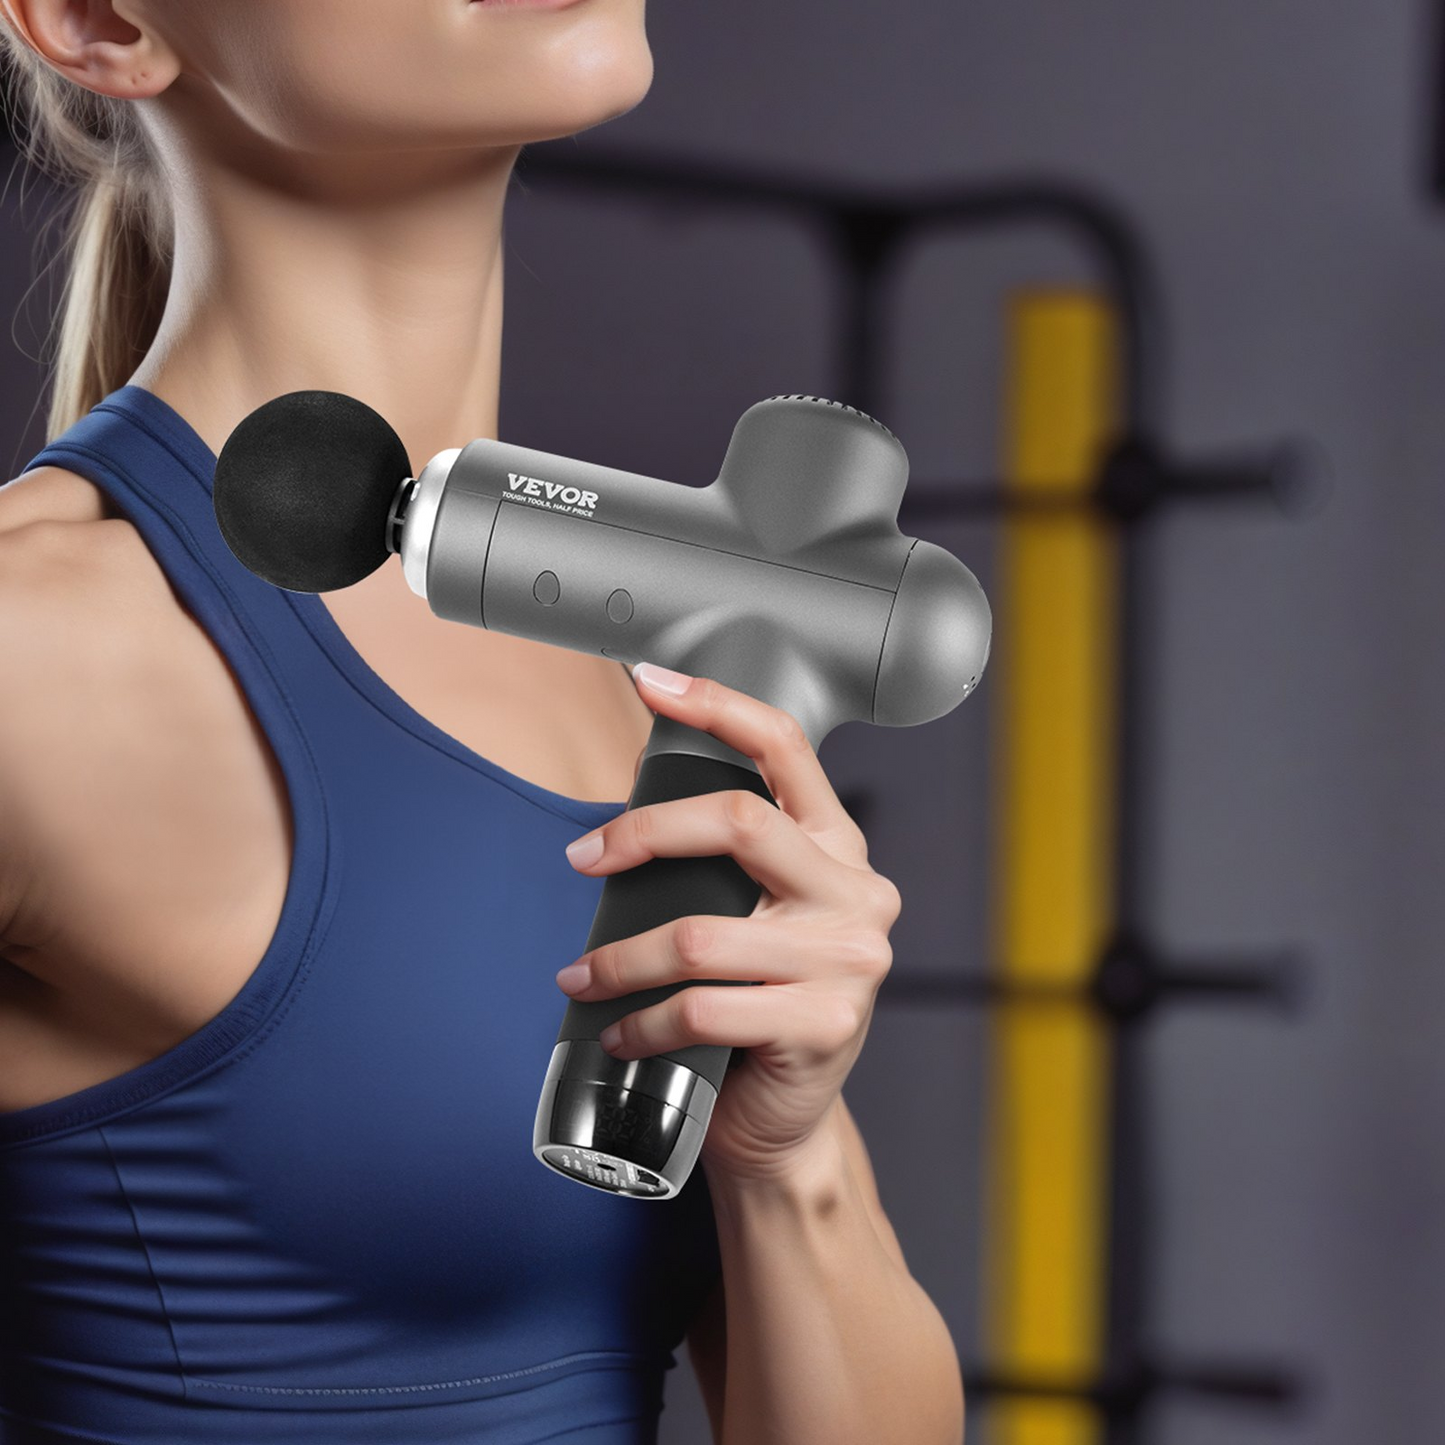 VEVOR Massage Gun Deep Tissue, Percussion Muscle Massager for Athletes - with 8 Speed Levels & 6 Massage Heads, 24V 2500mAh Batteries, Handheld Electric Massage Gun for Pain Relief, Muscle Relaxation, Goodies N Stuff